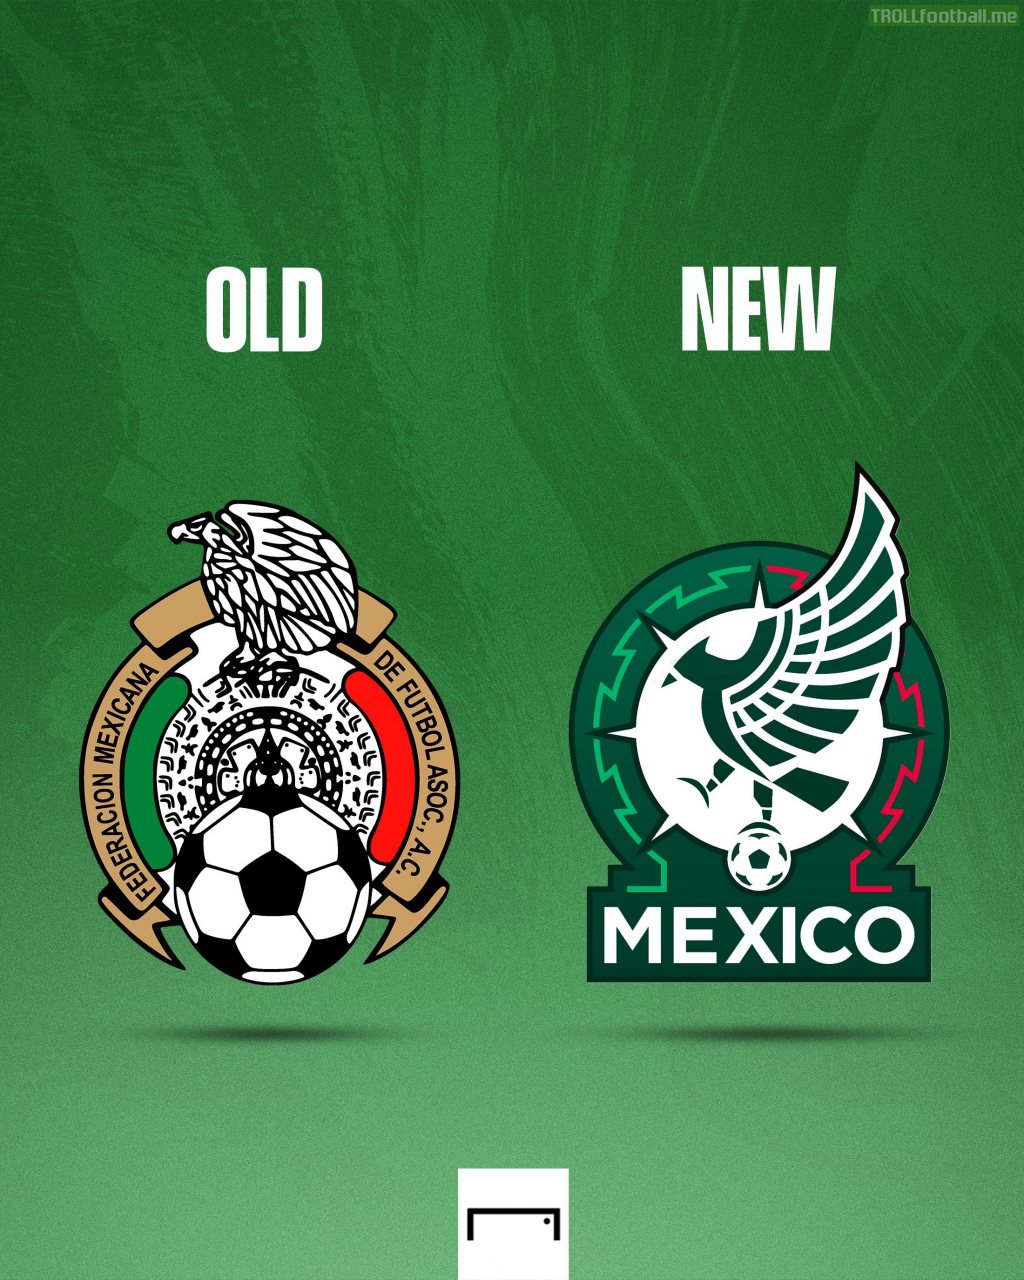 Mexico have a new national team crest....